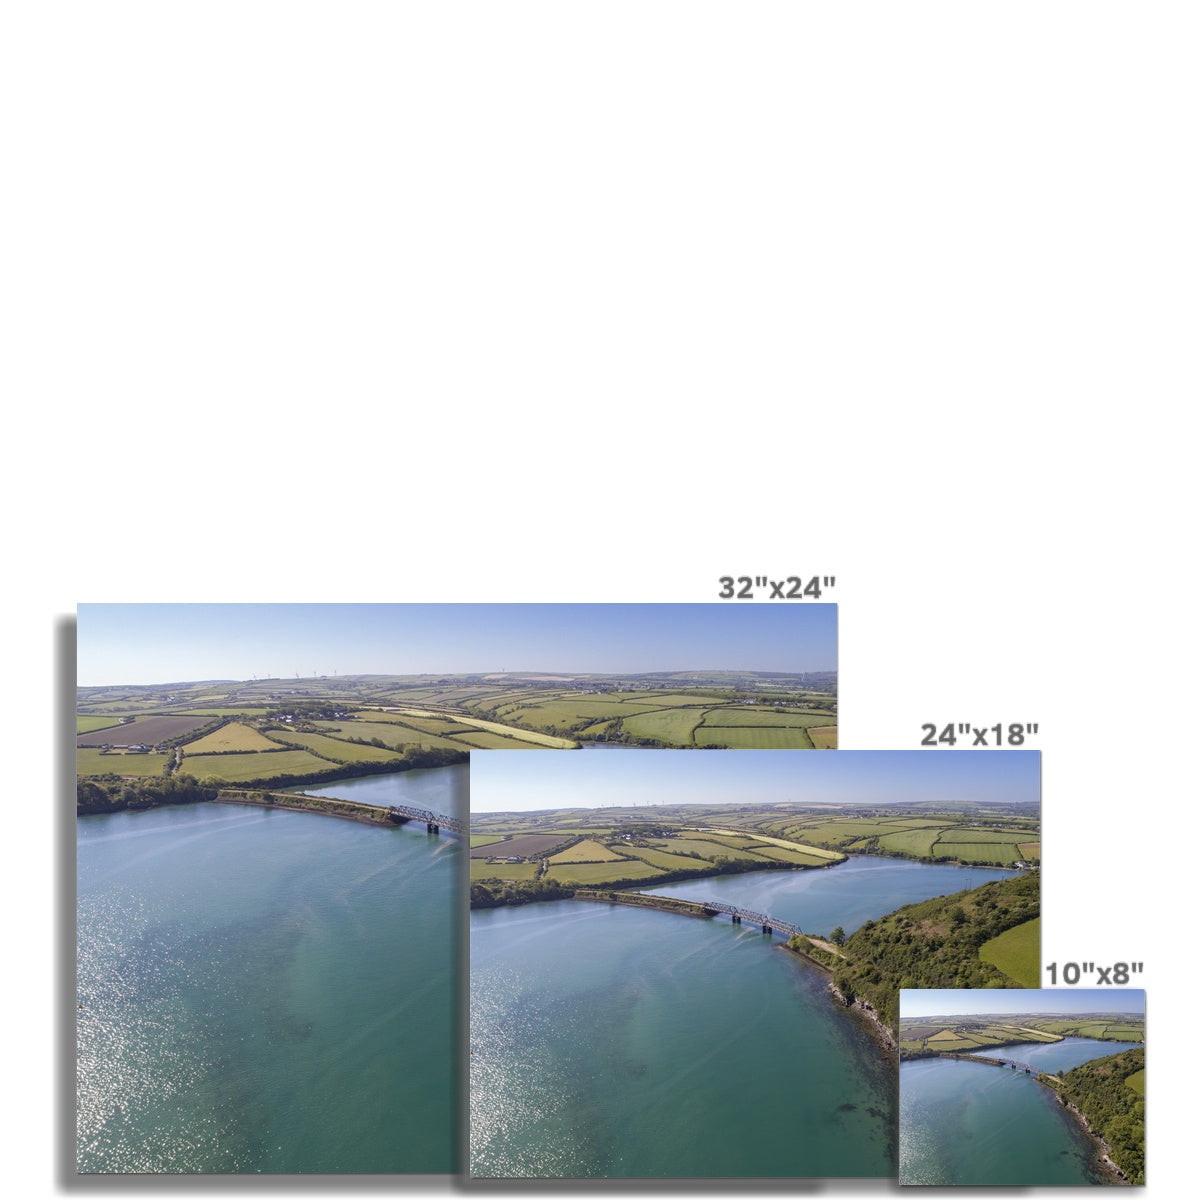 padstow picture sizes